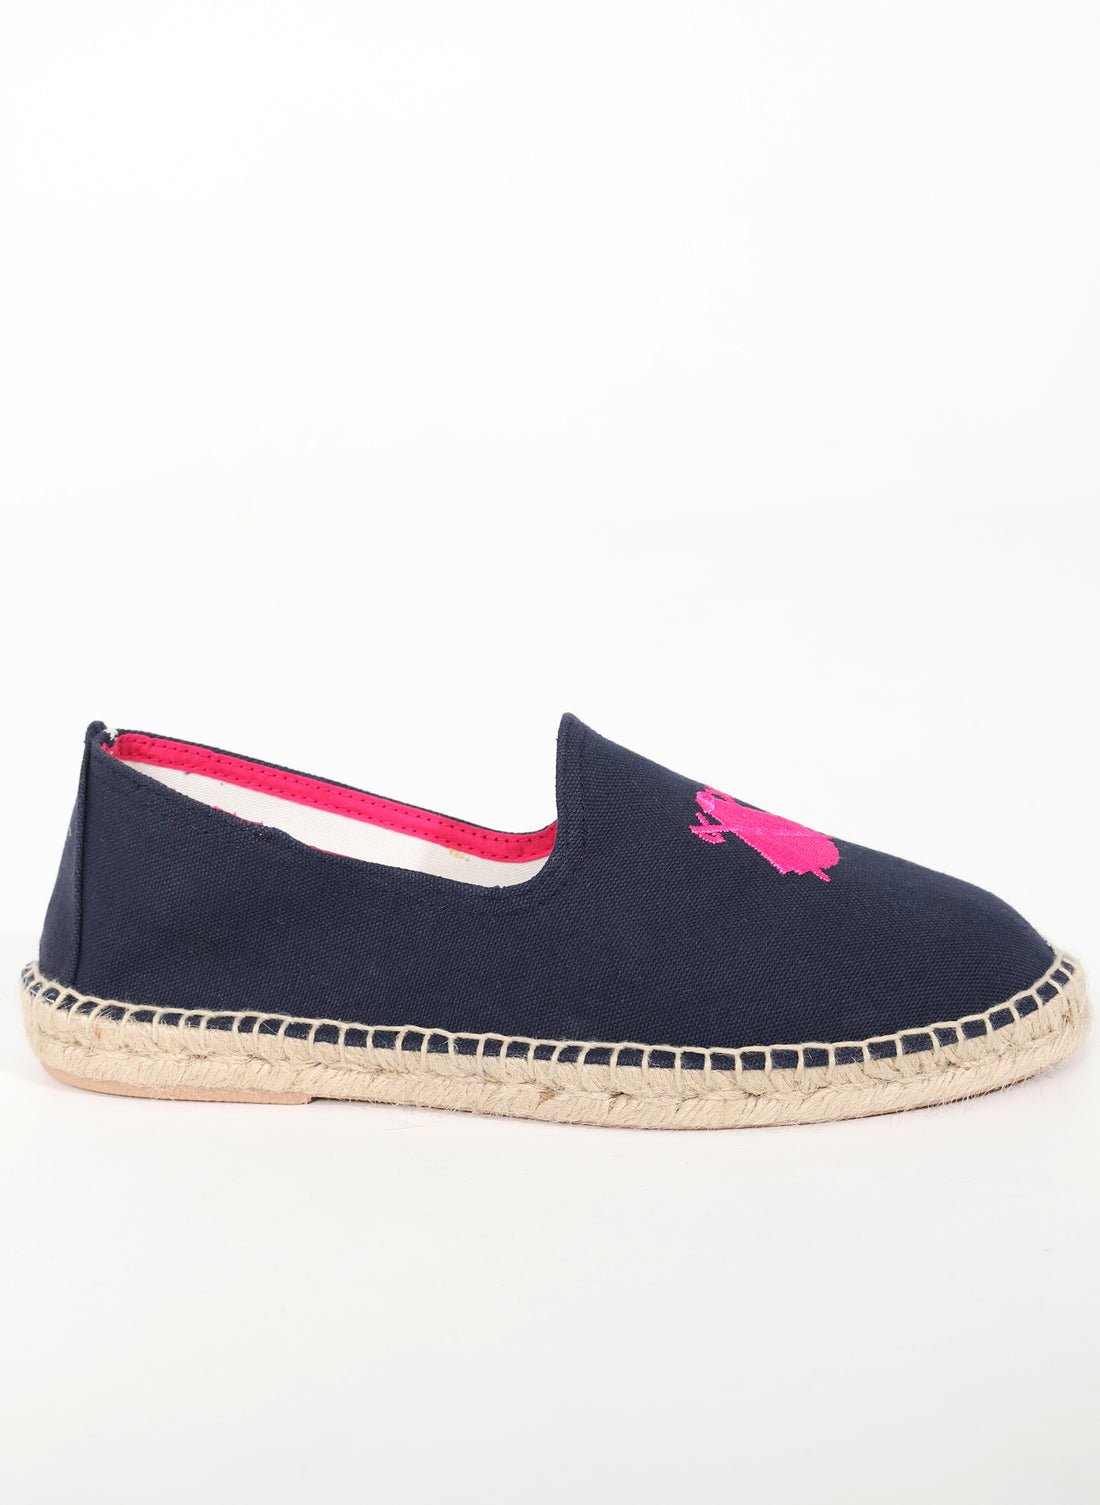 Espadrilles Man Navy Blue Embroidered Pink Cape